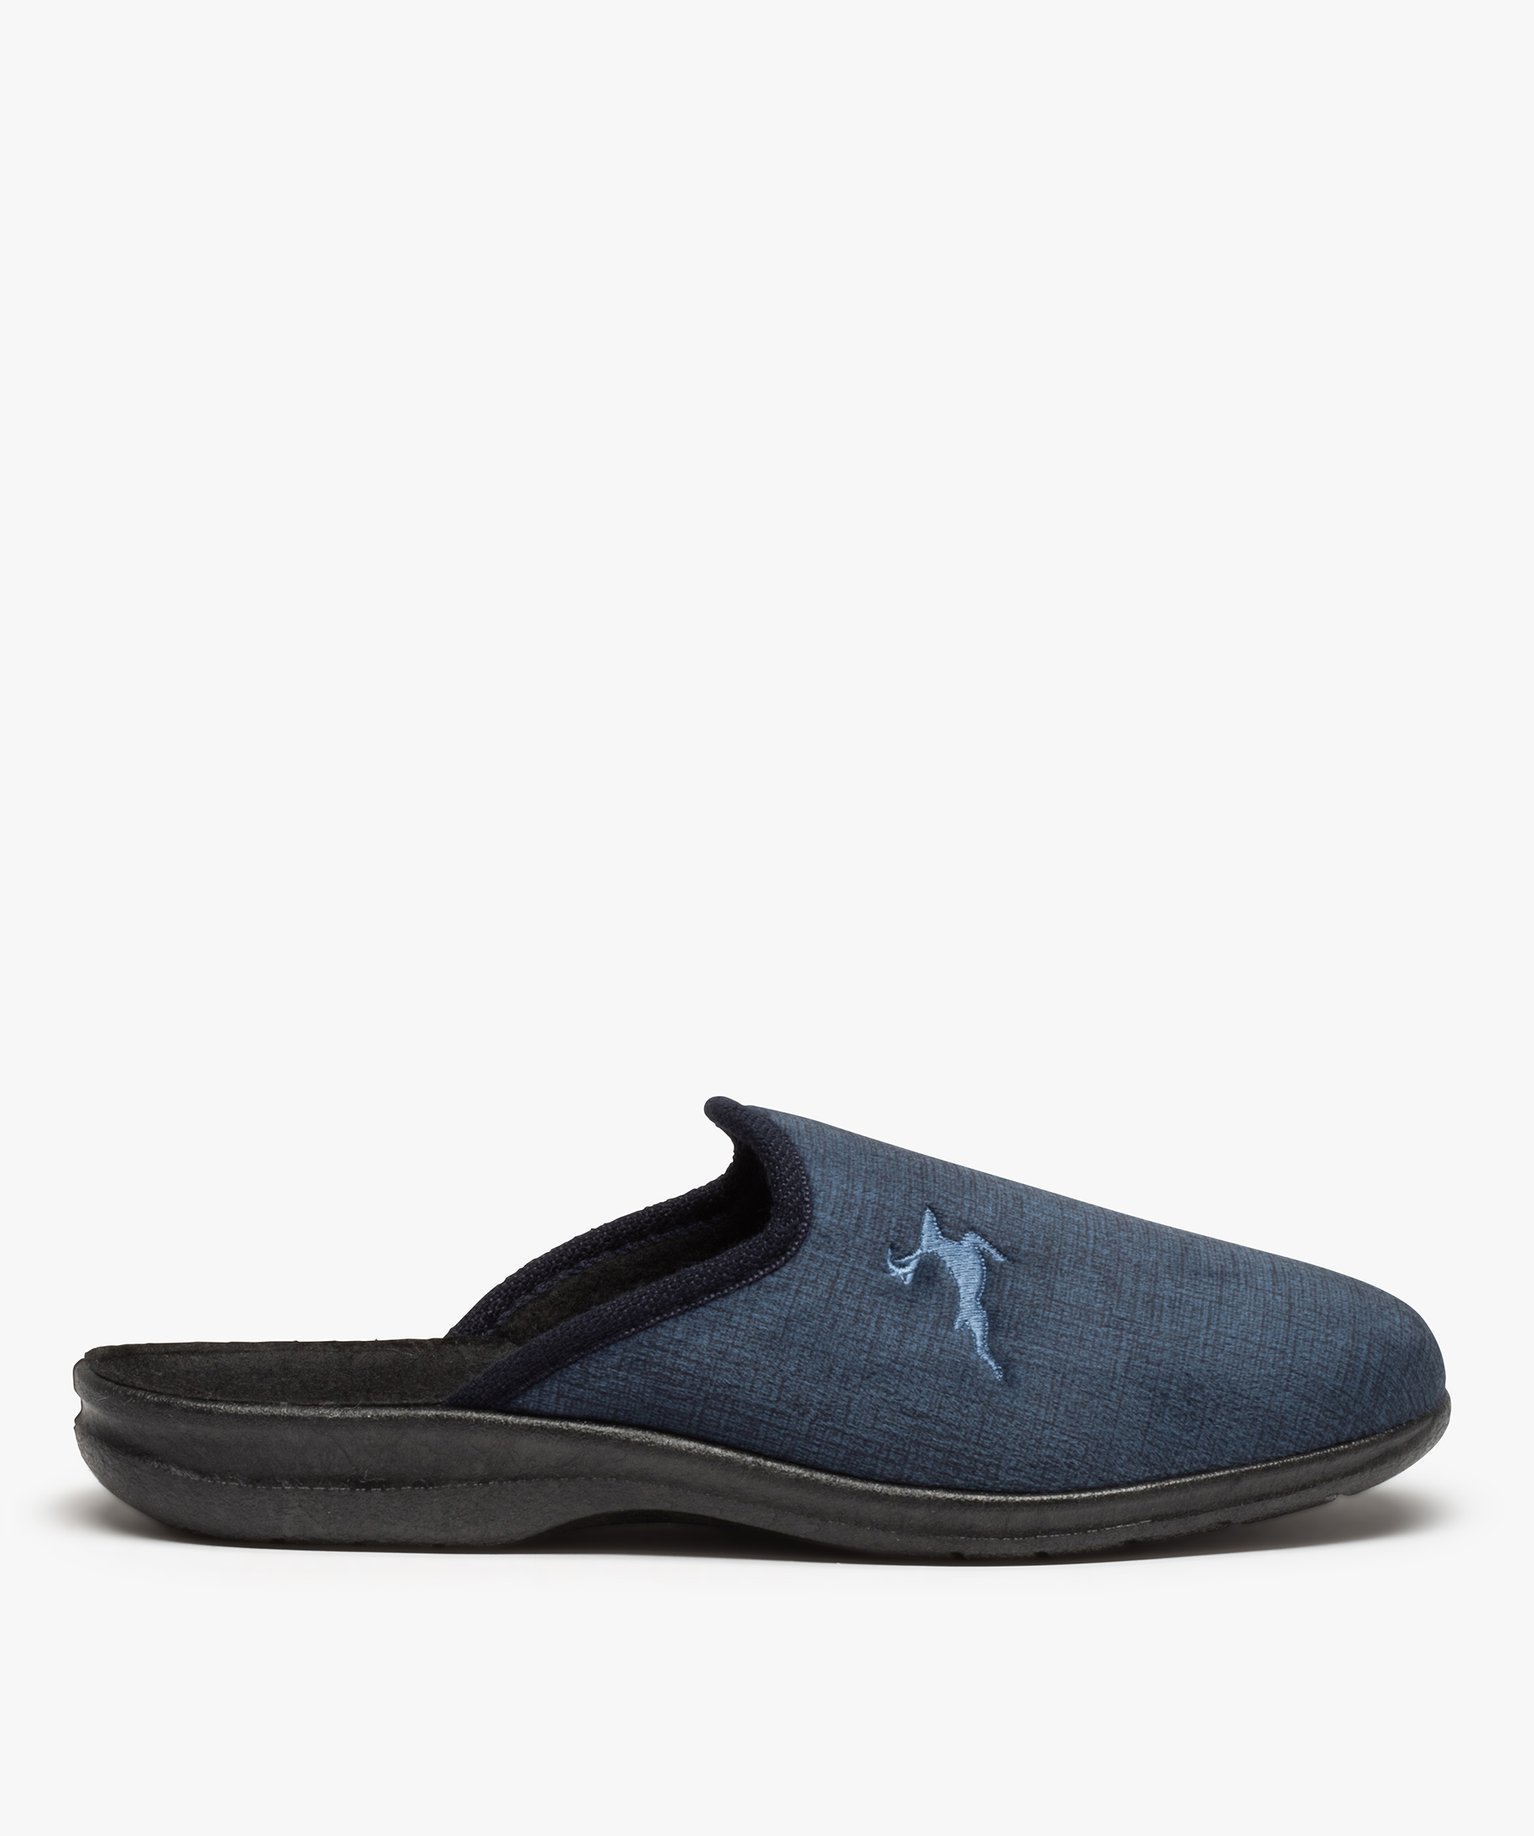 chaussons homme mules en velours ras effet toile brodee bleu